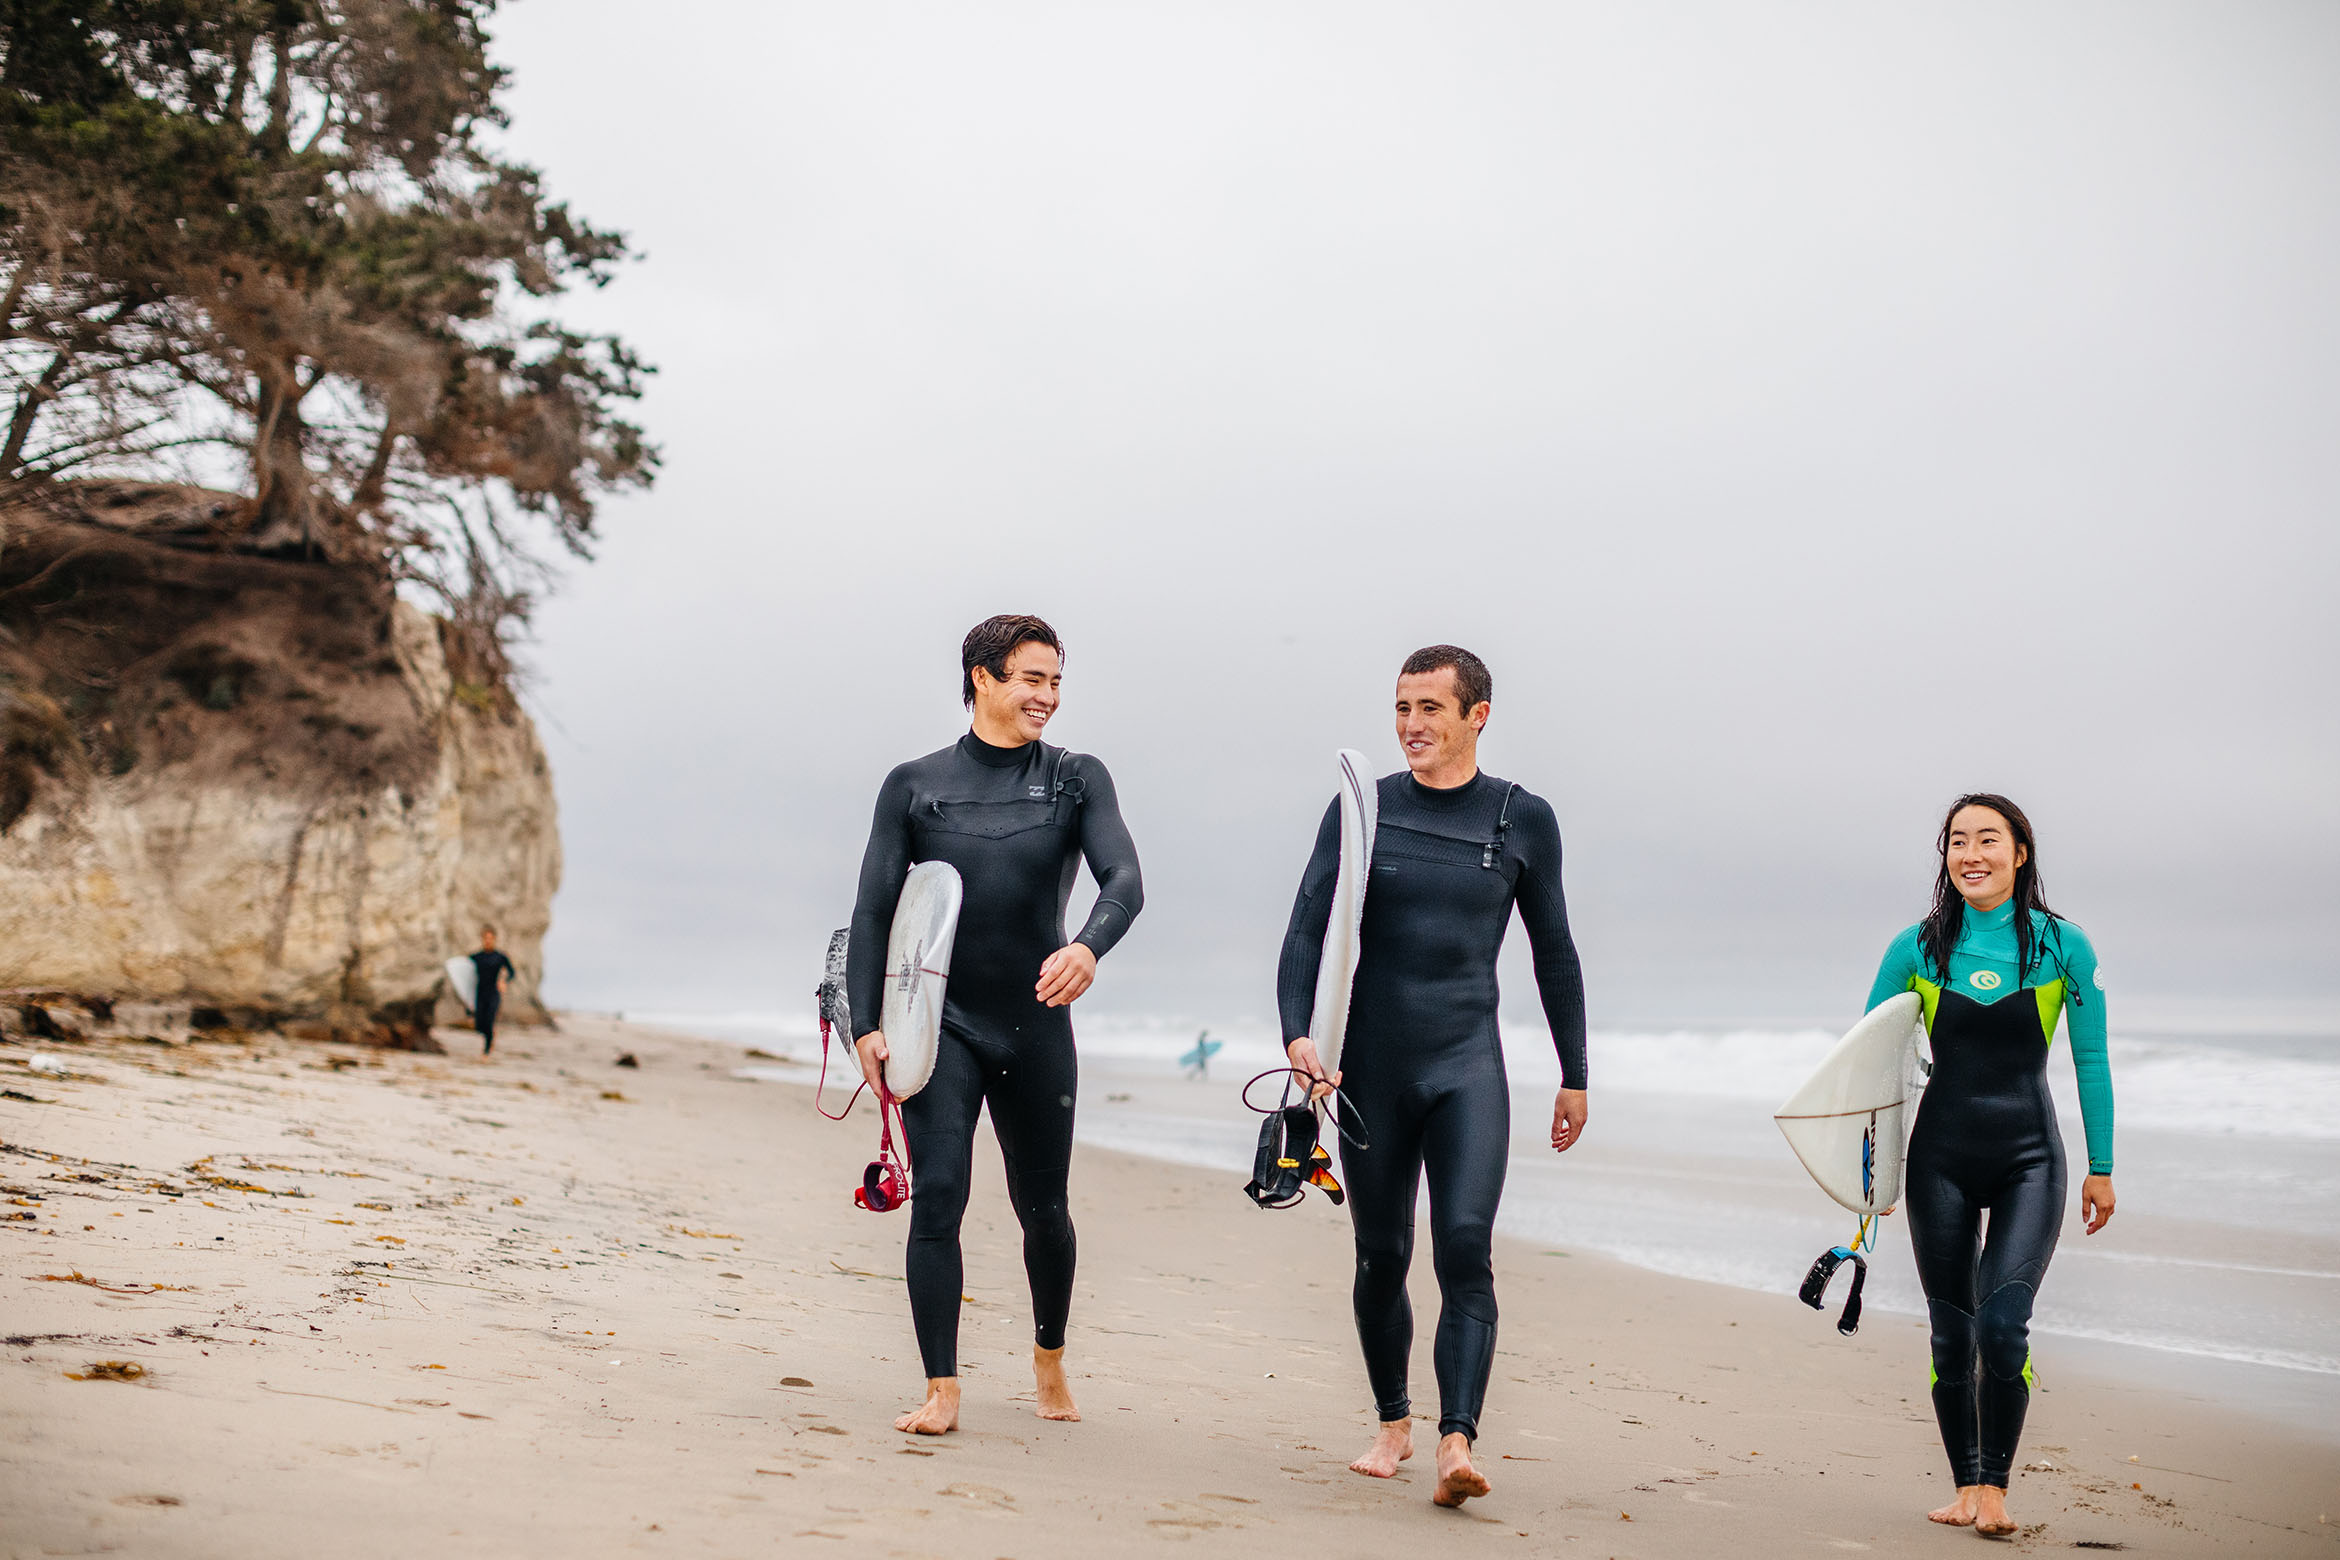 This is an image of three student surfers on the beach.